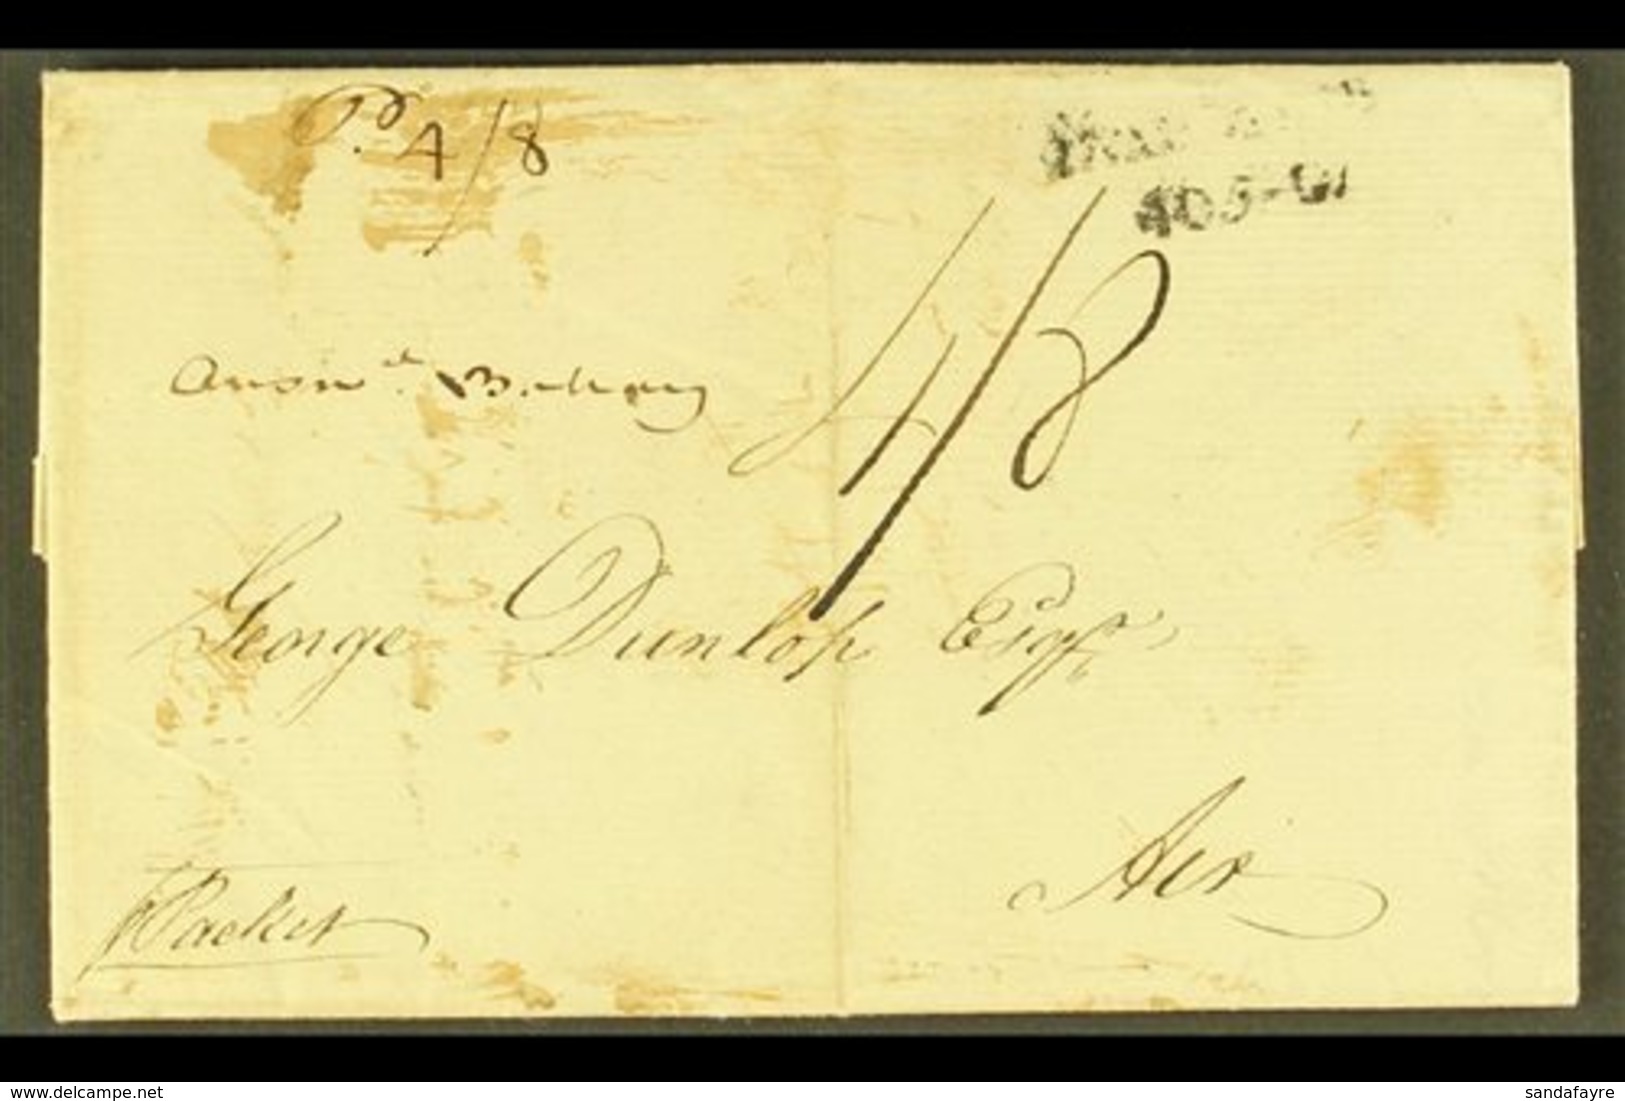 1812 ENTIRE TO SCOTLAND 1812 (4 FEB) Entire Letter Addressed To George Dunlop At Ayr, With Manuscript "4/8" Rate And End - Grenada (...-1974)